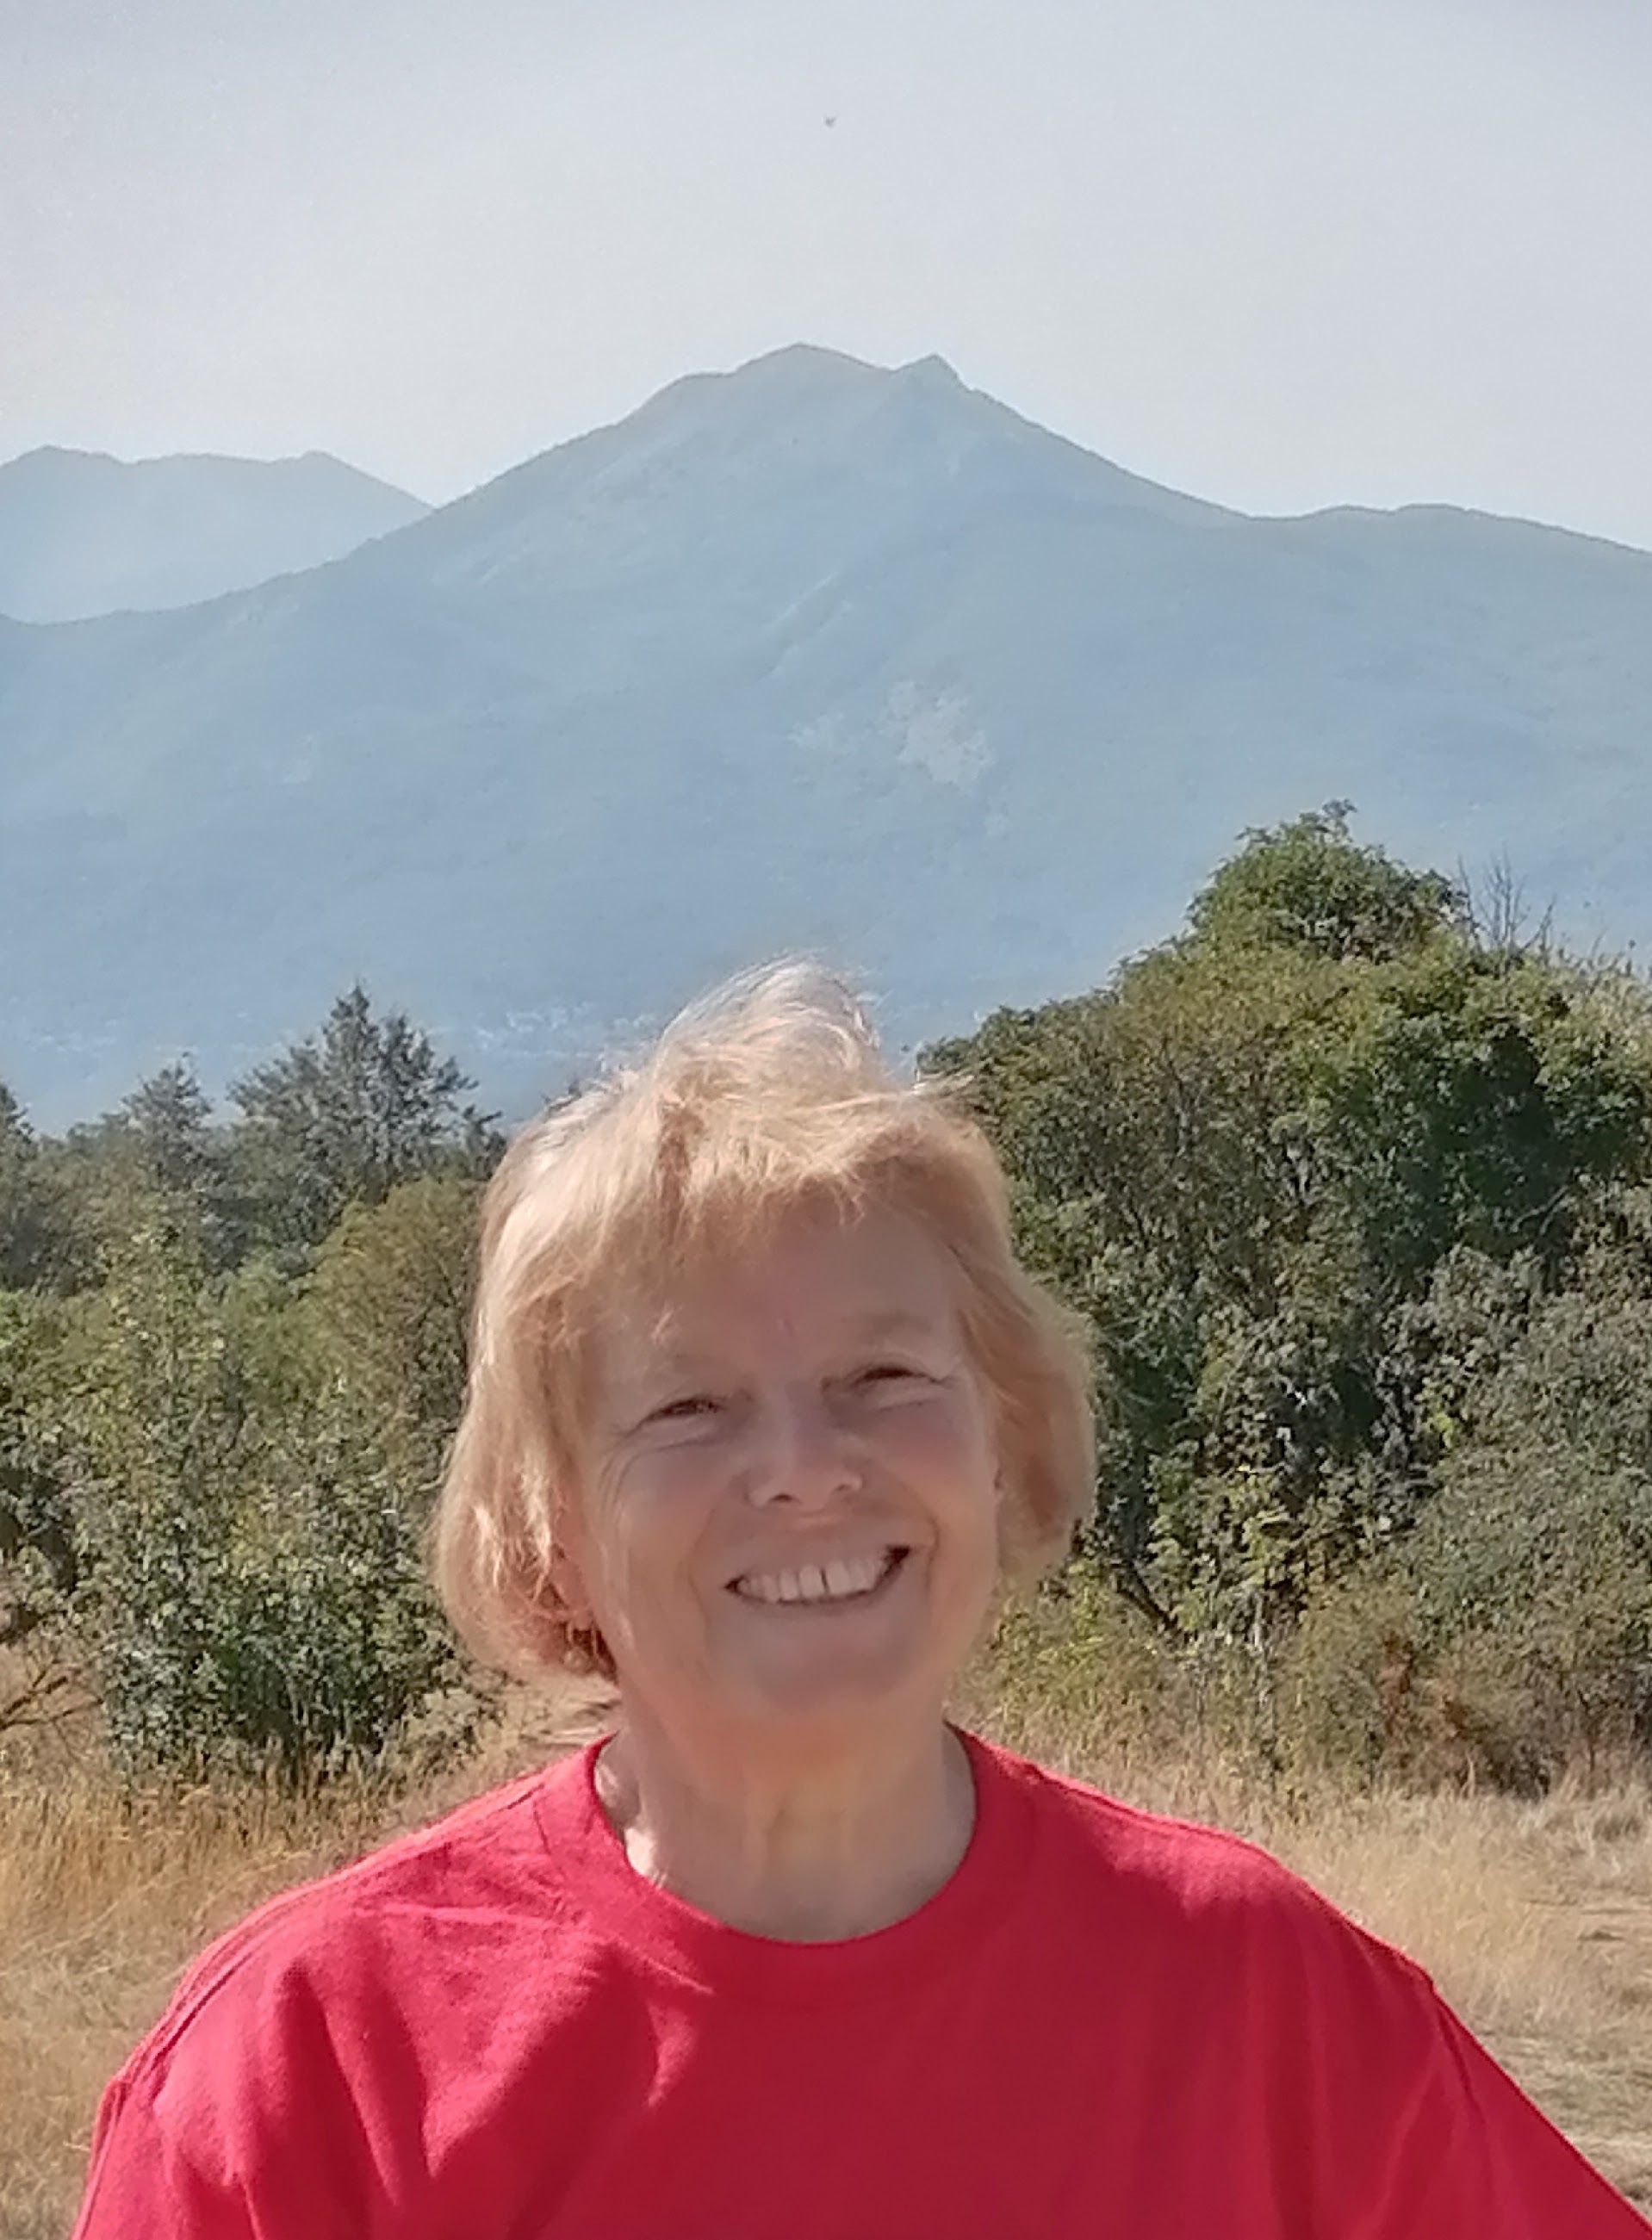 Person in a red shirt and blond hair smiling outside with trees and mountains in the background.